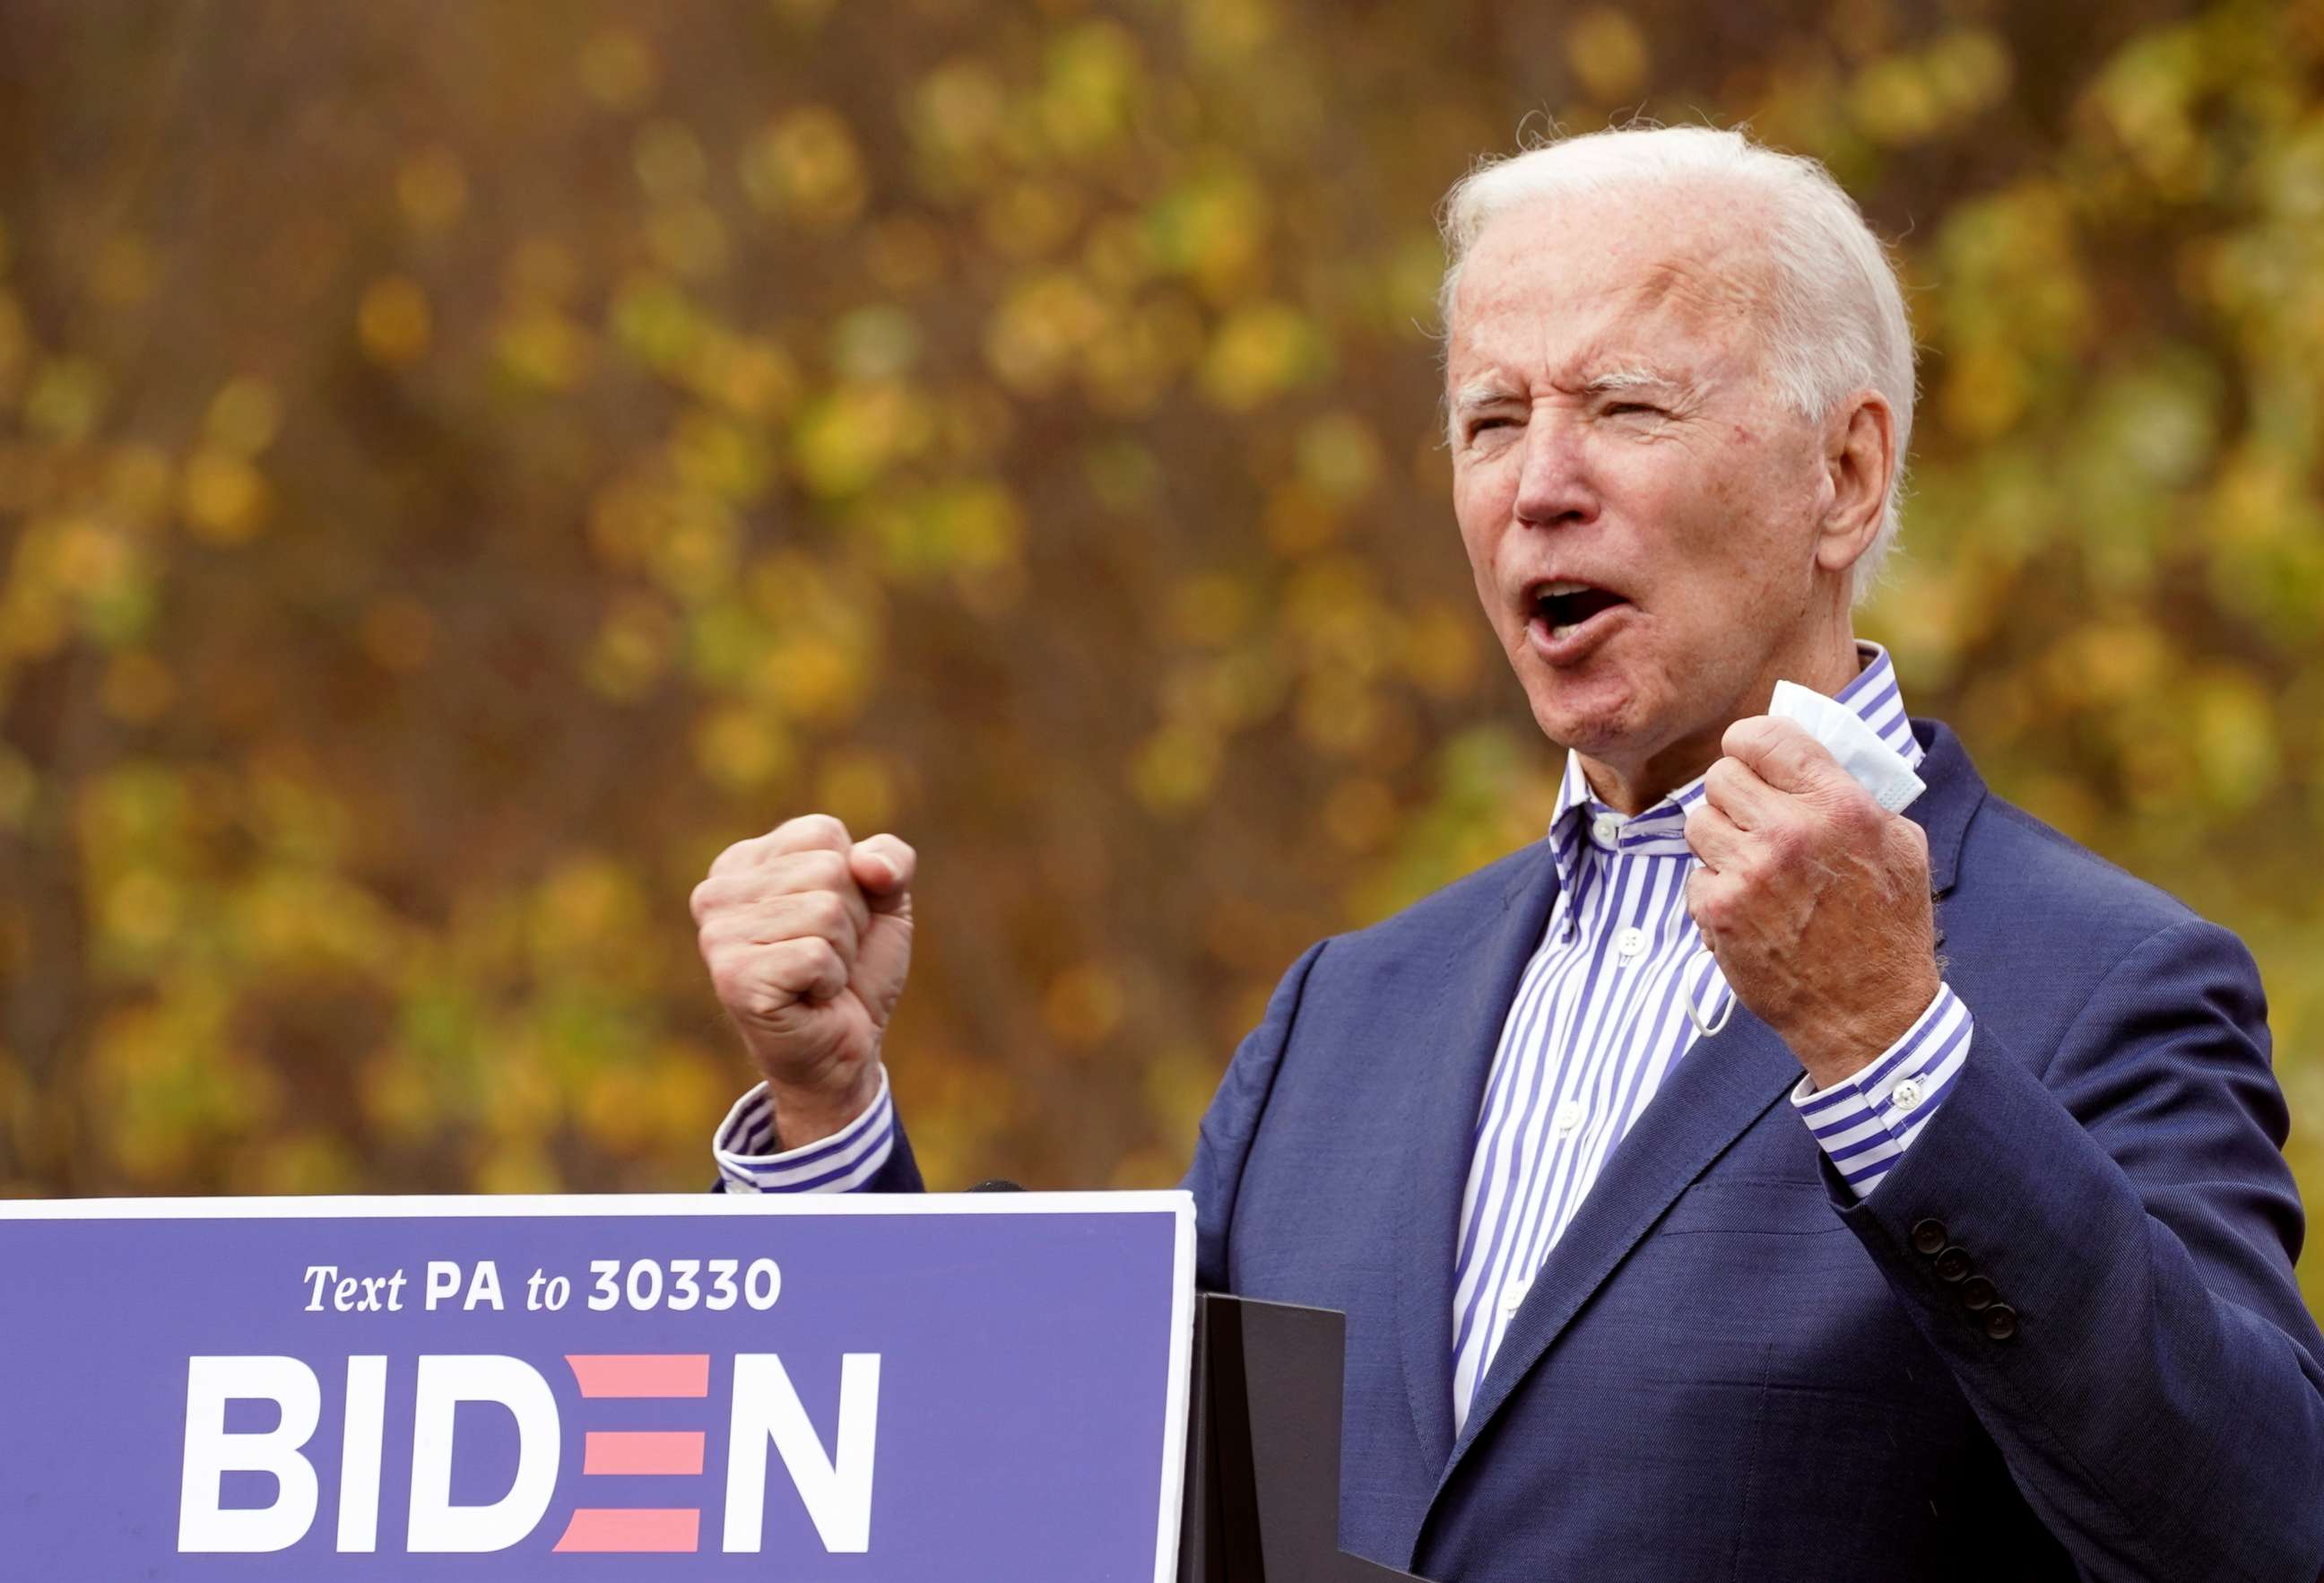 PHOTO: Democratic presidential candidate Joe Biden speaks during a drive-in campaign event at Bucks County Community College in Bristol, Pa. Oct. 24, 2020.